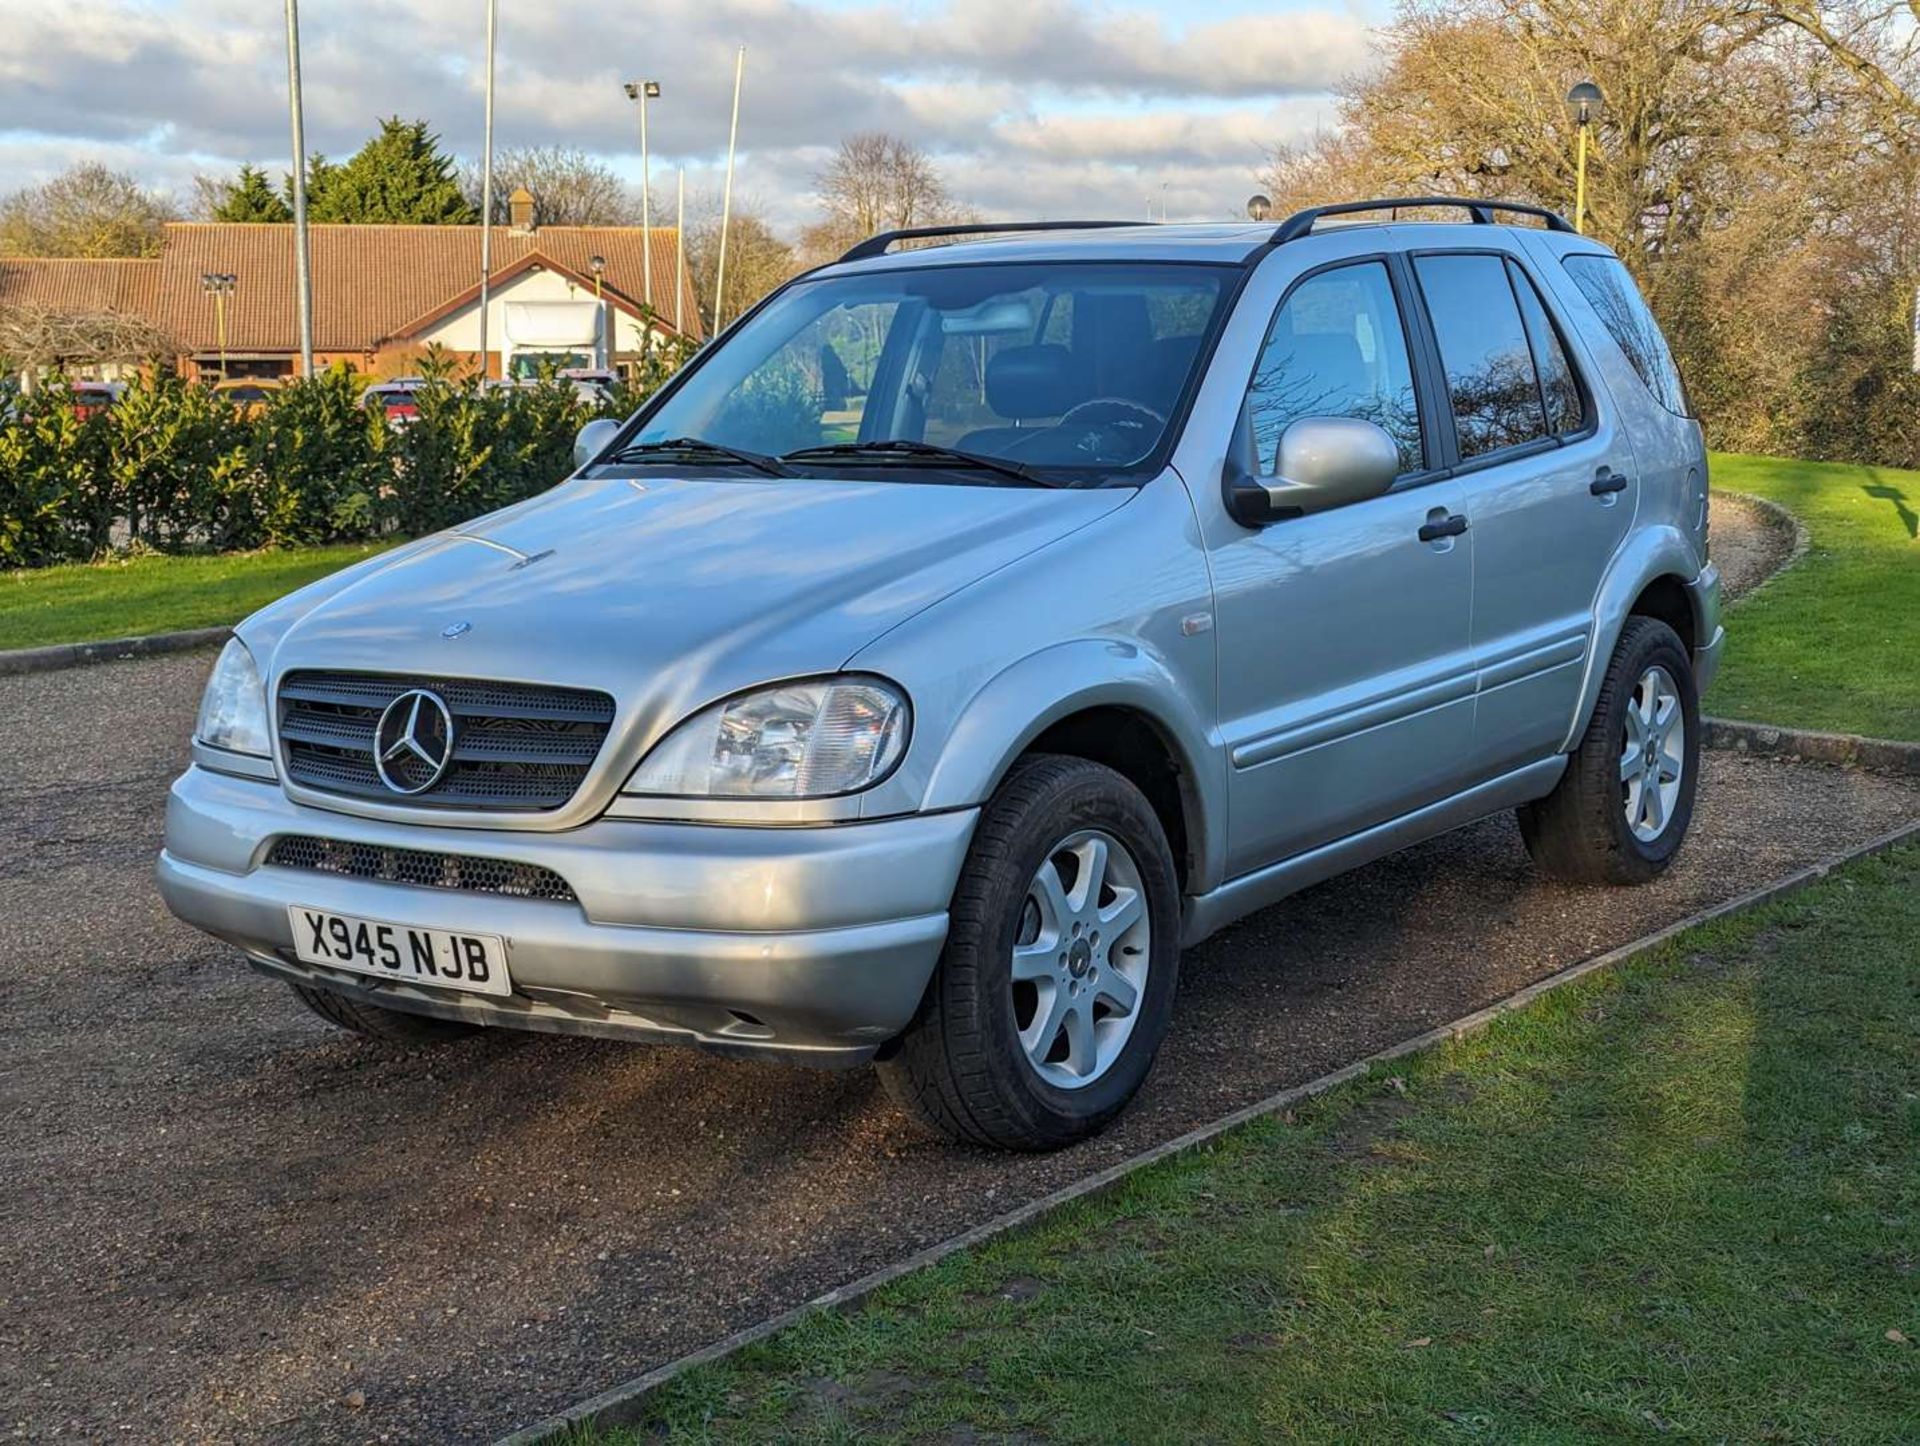 2001 MERCEDES ML 430 LHD - Image 3 of 28